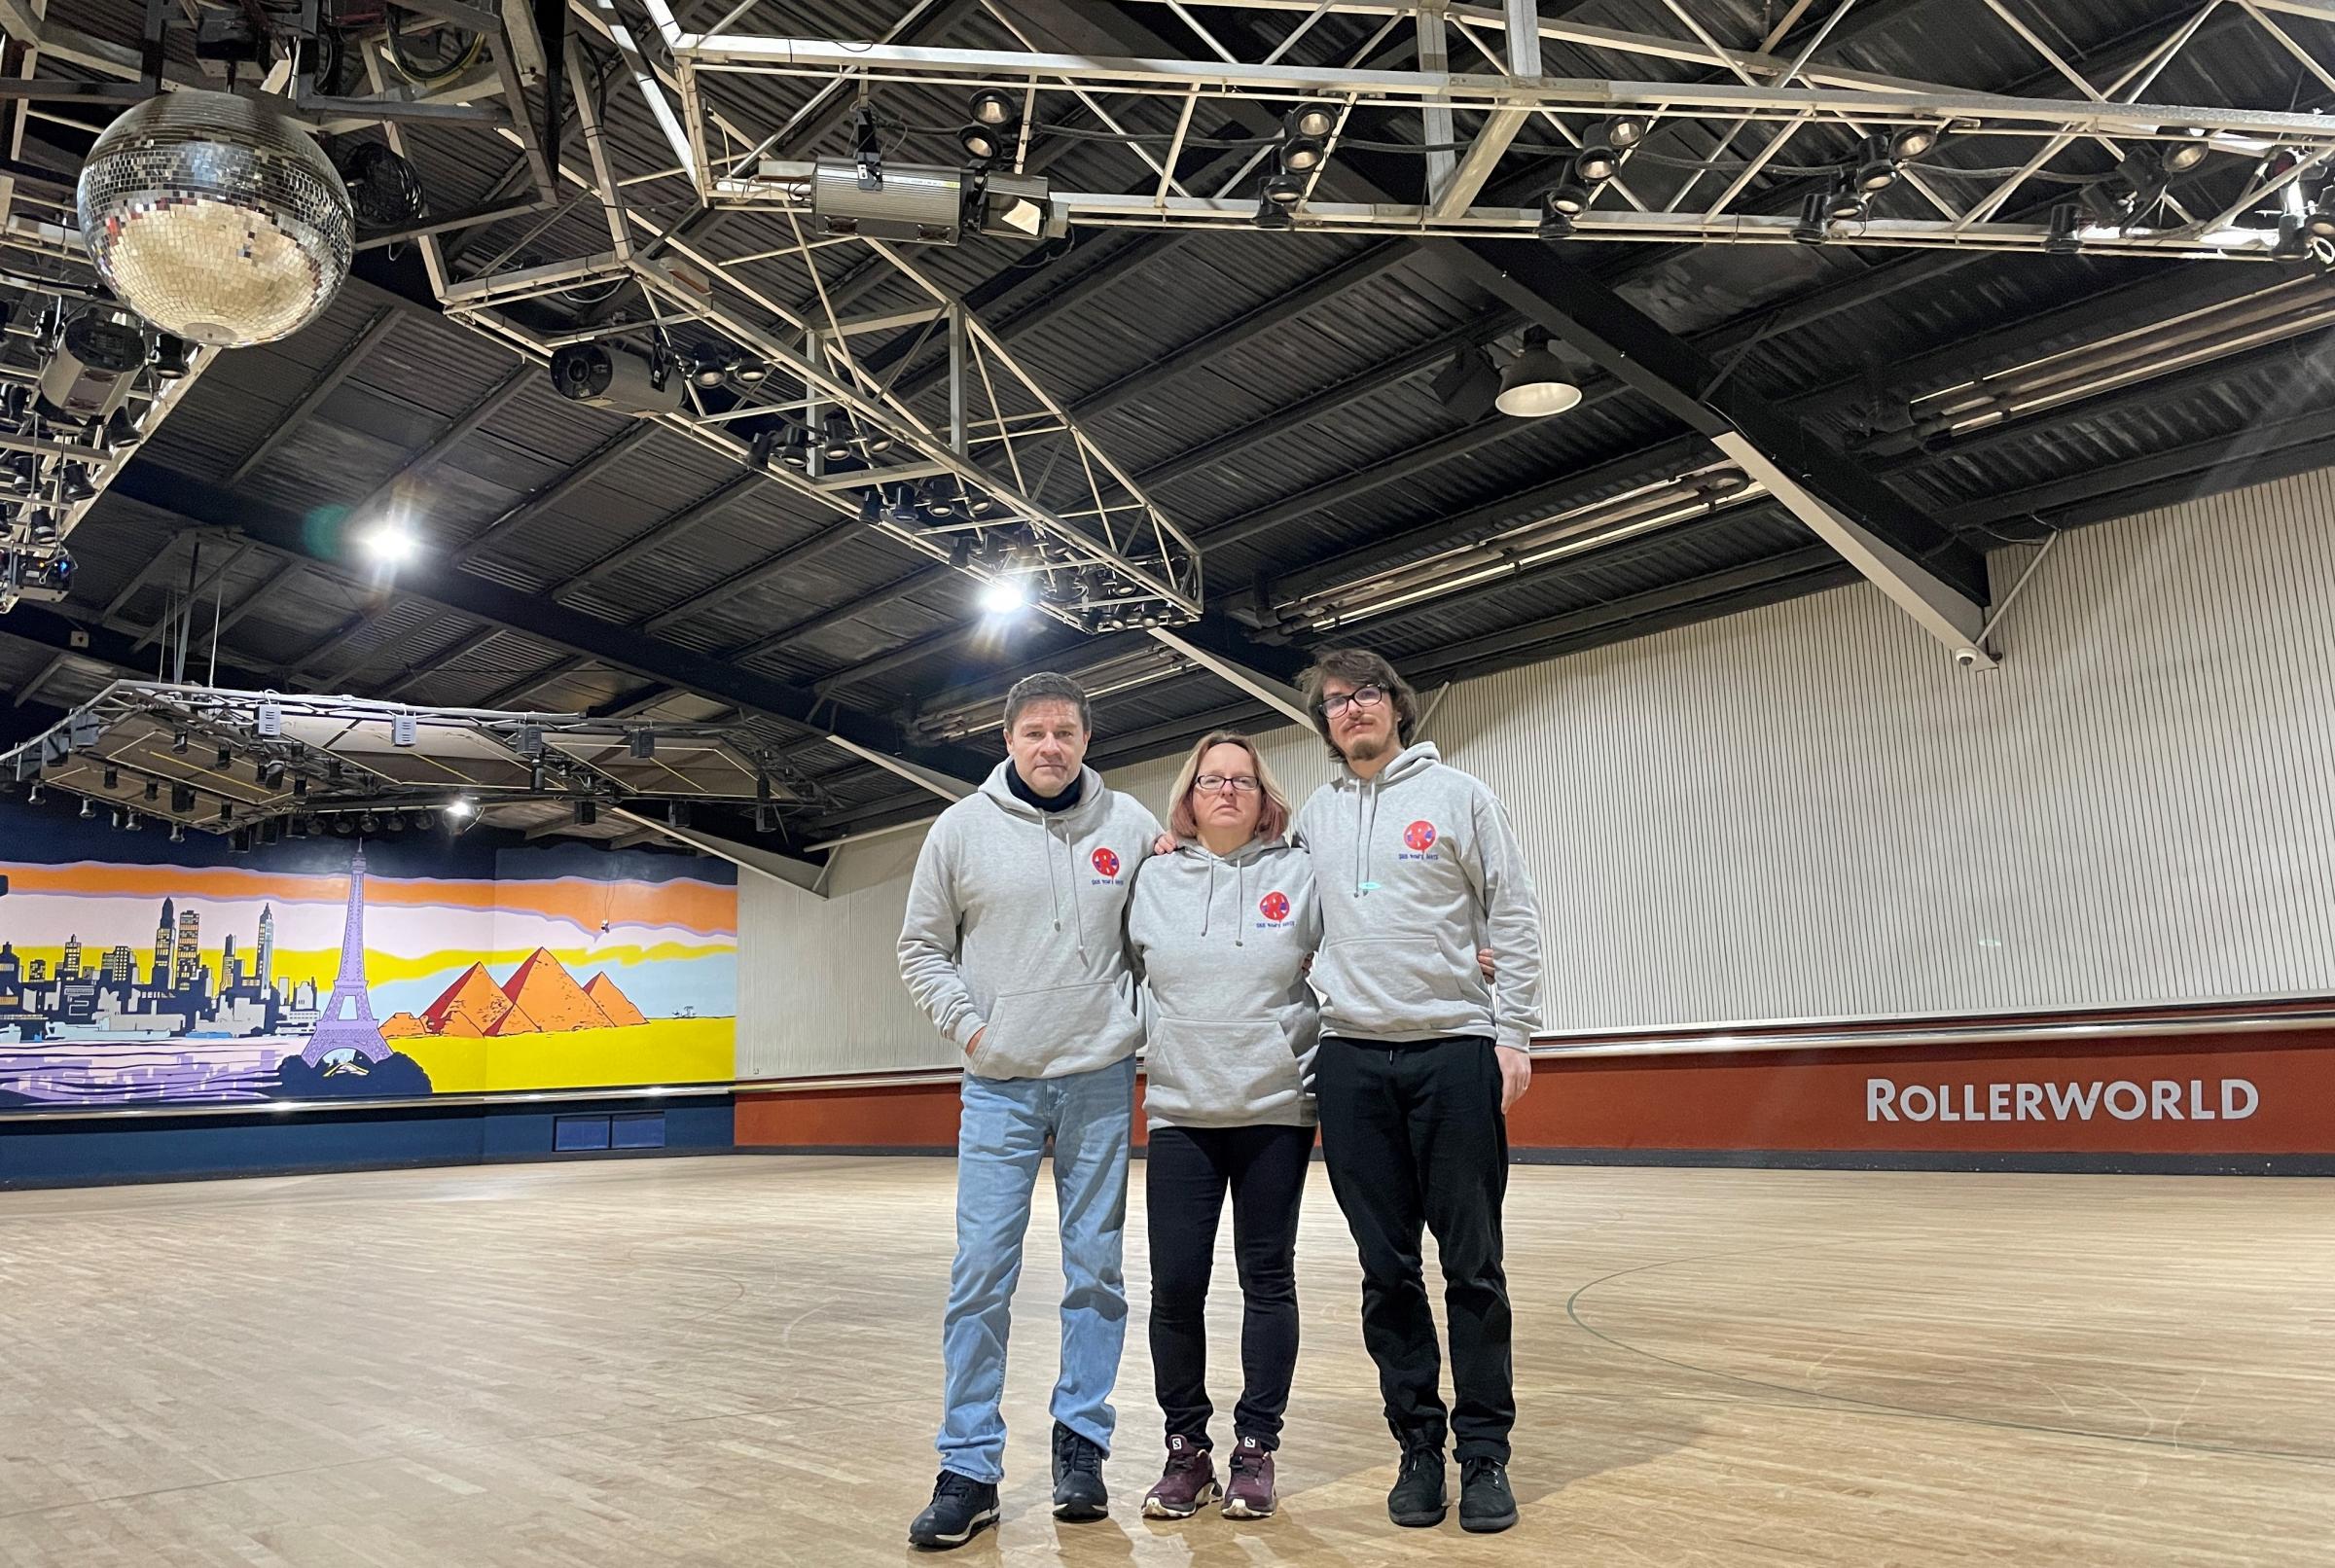 Colchester Rollerworld to remain closed despite agreeing terms